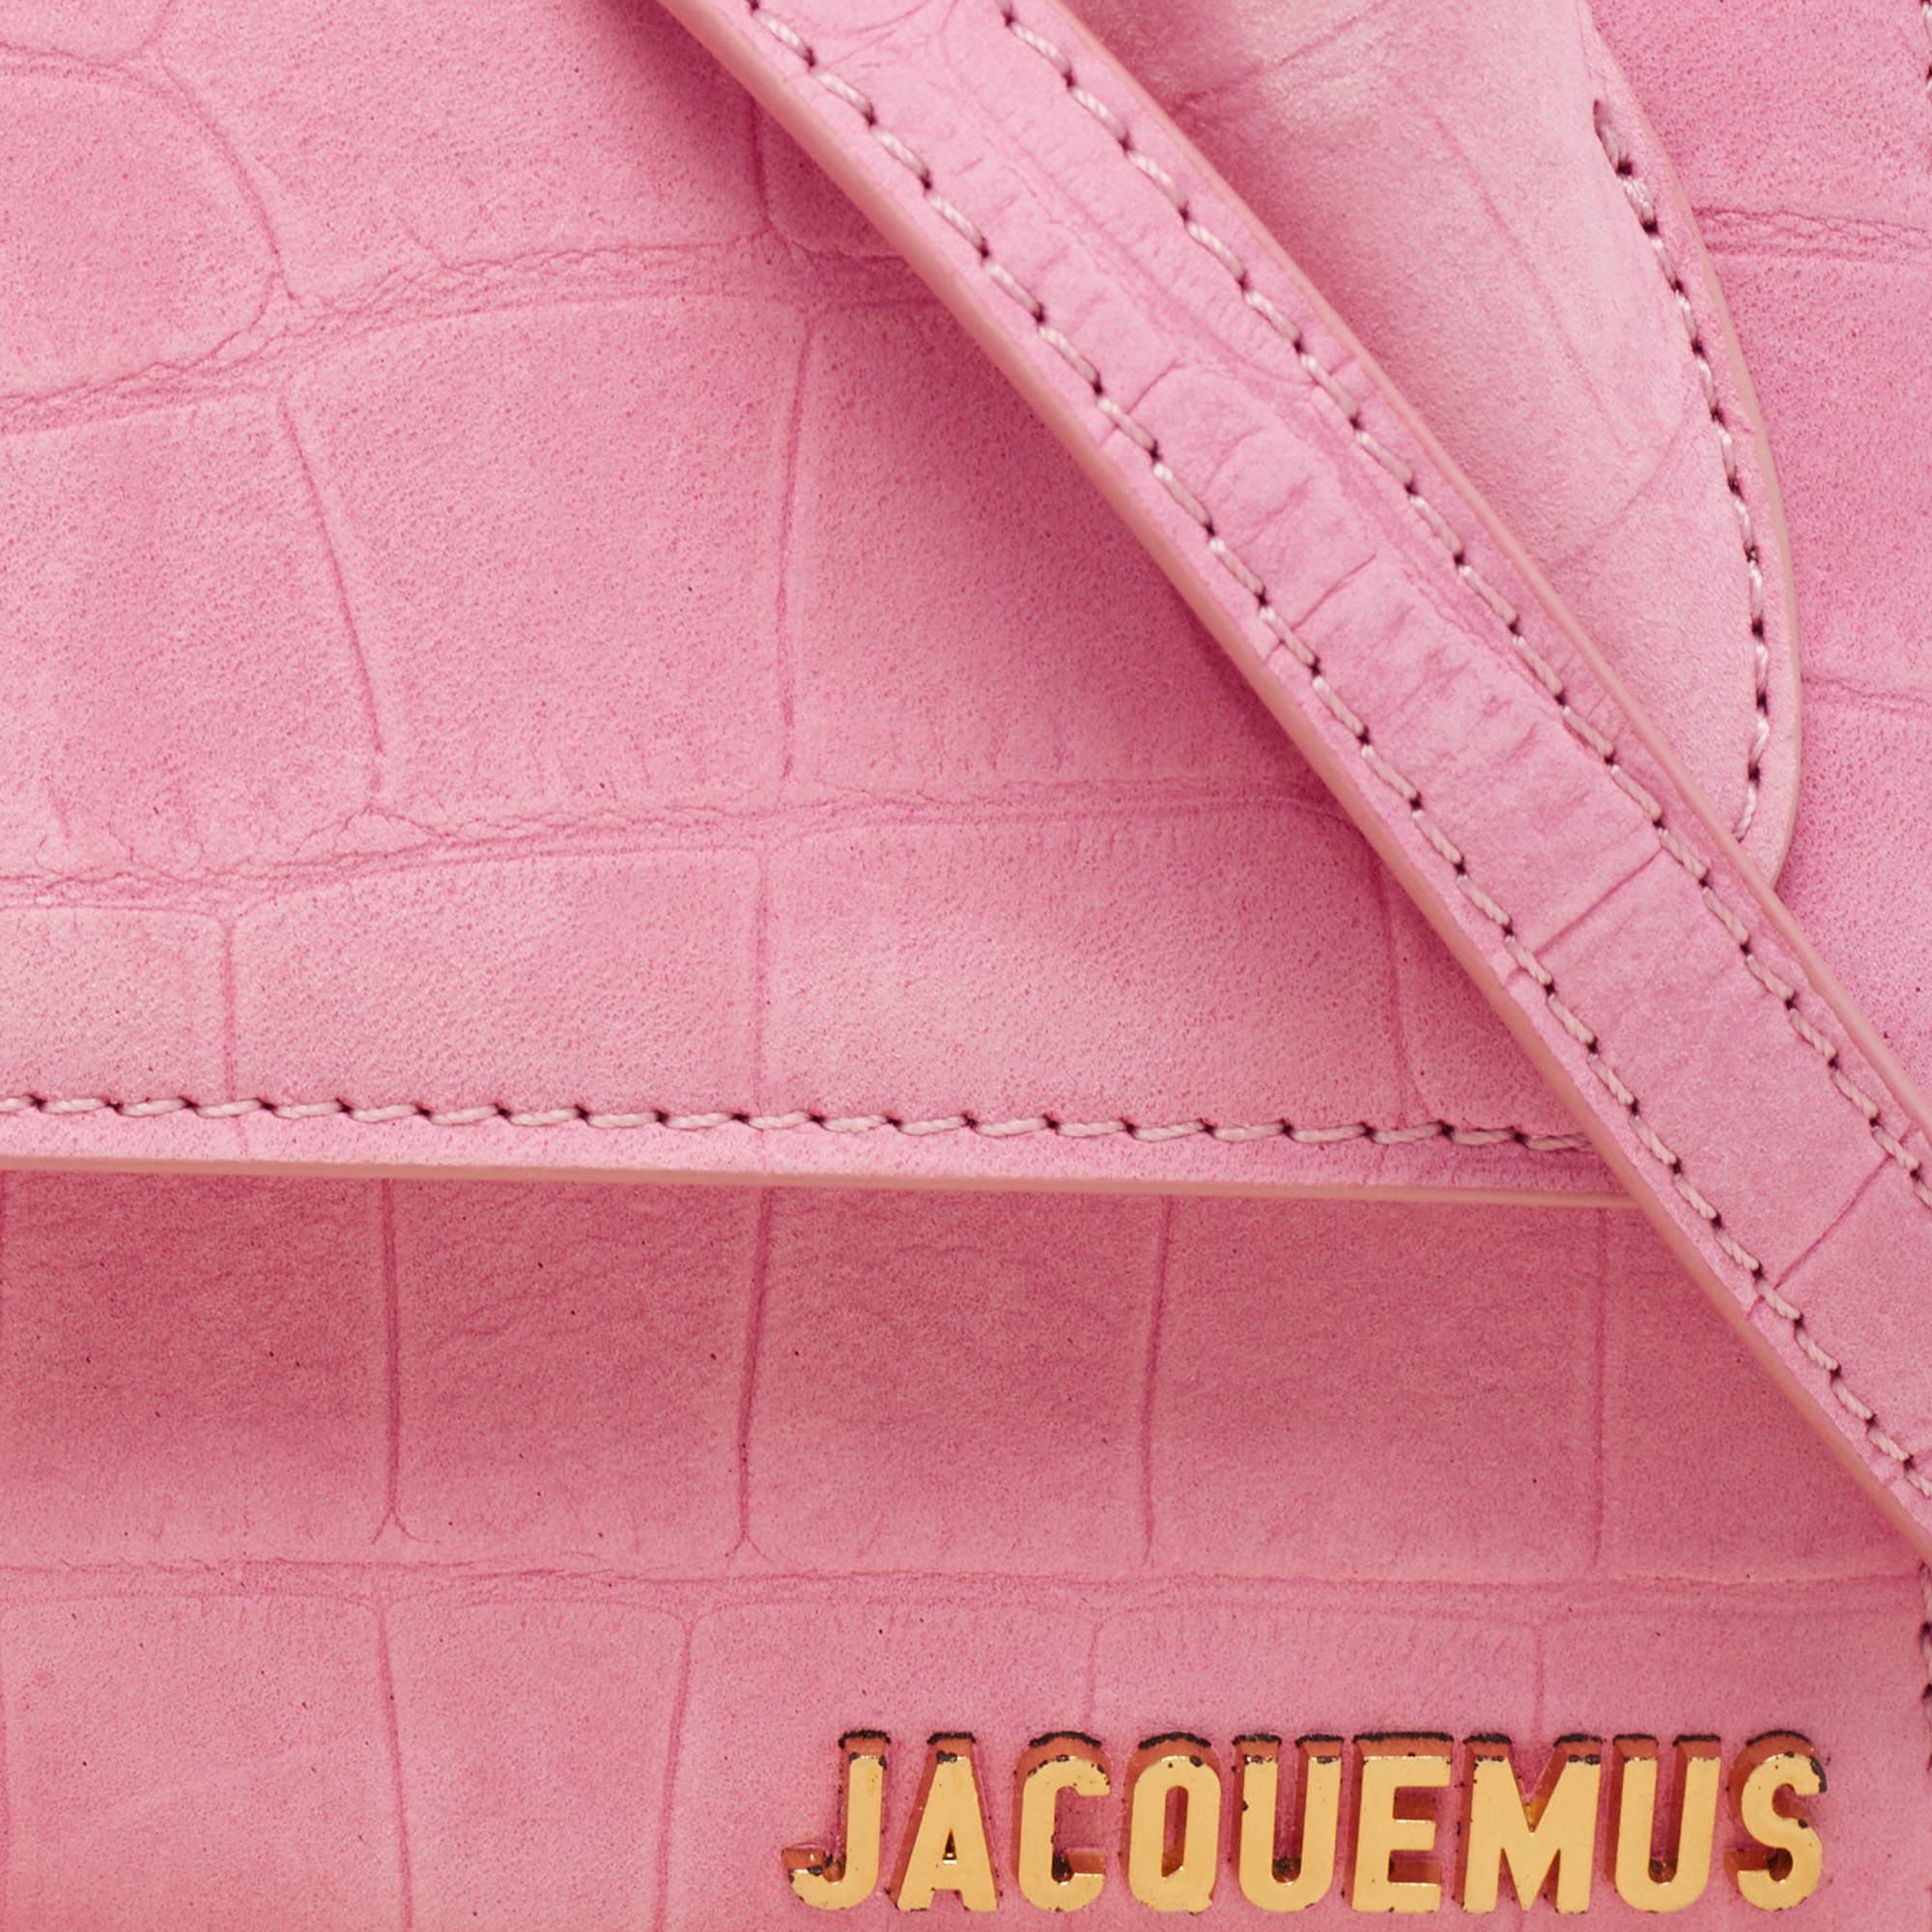 Jacquemus Light Pink Croc Embossed Nubuck Leather Long Le Chiquito Top Handle Ba 5